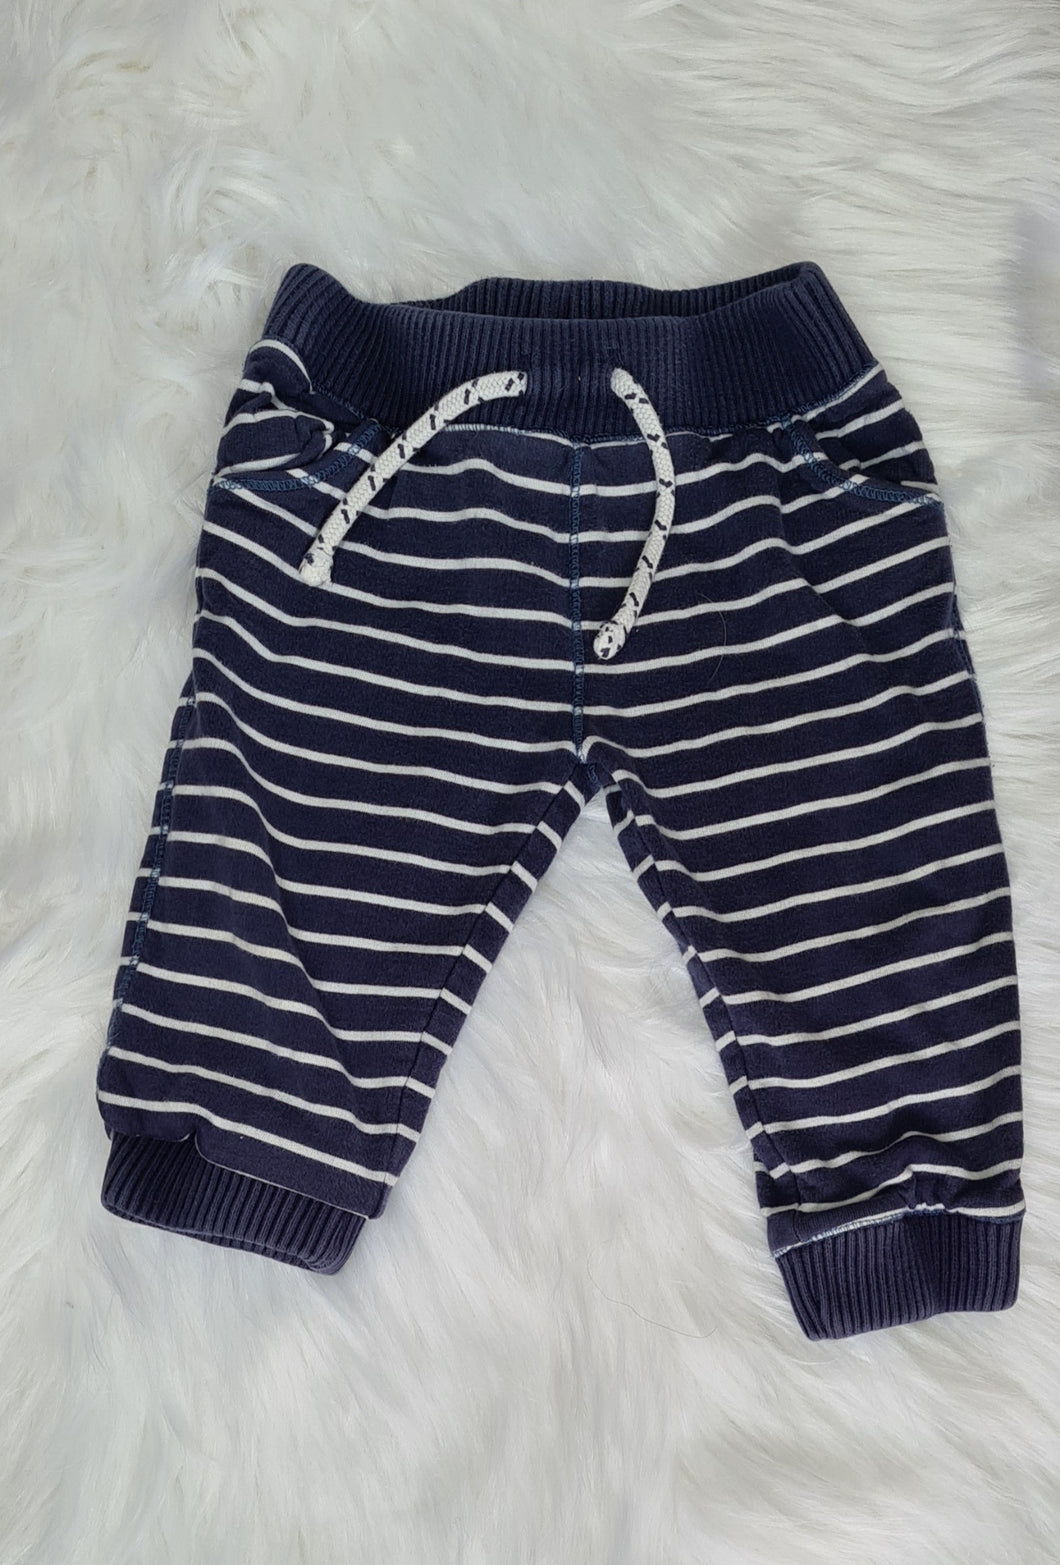 Boys 9-12 Months - Blue and White Striped Joggers